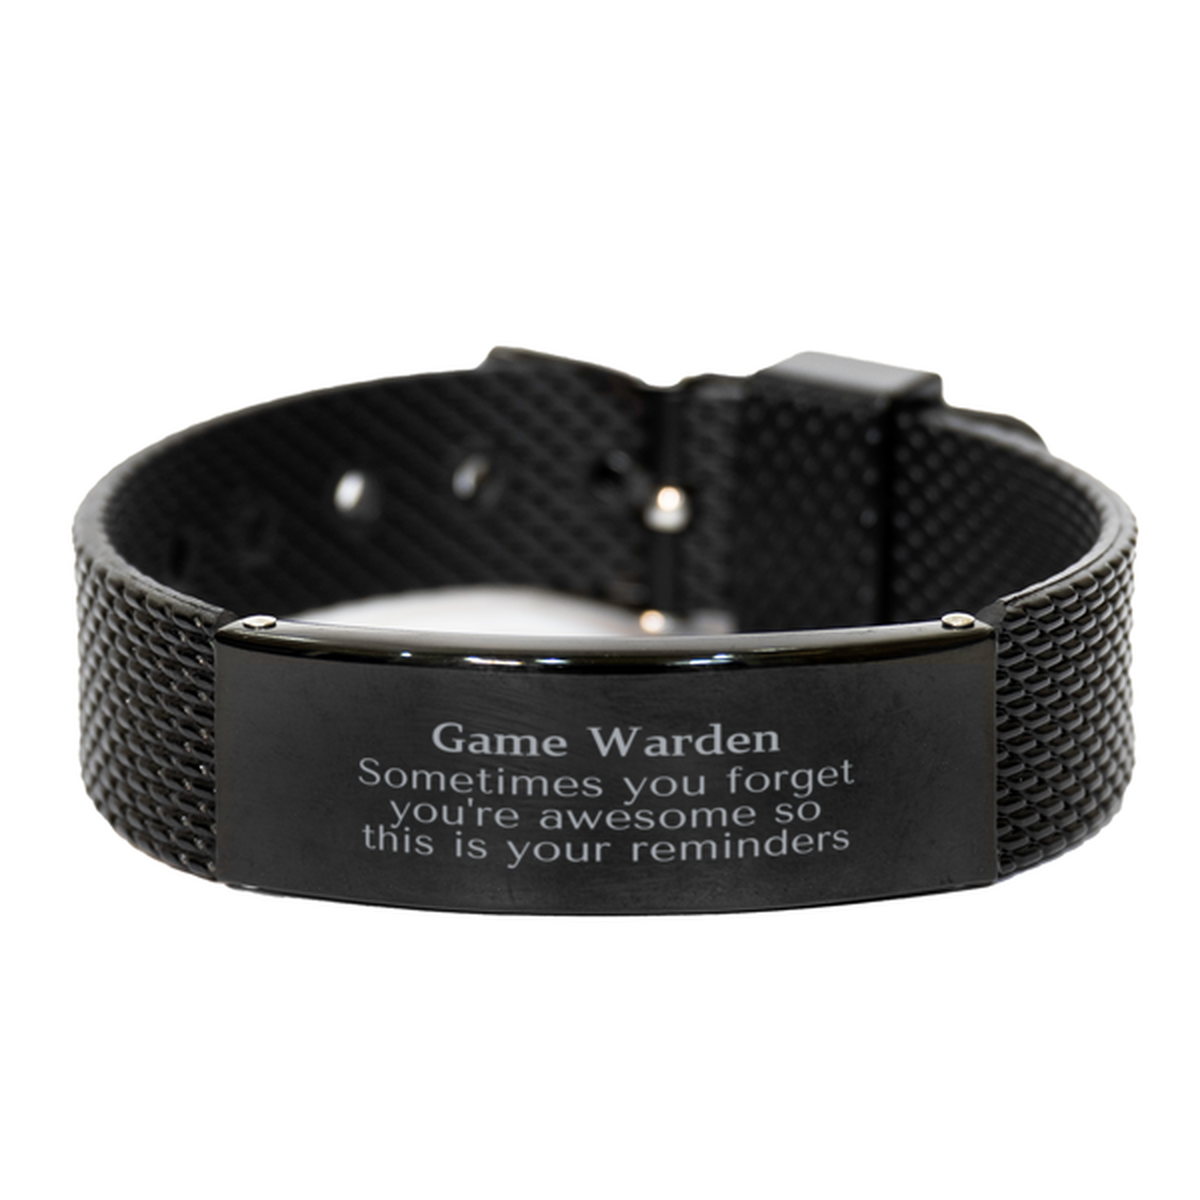 Sentimental Game Warden Black Shark Mesh Bracelet, Game Warden Sometimes you forget you're awesome so this is your reminders, Graduation Christmas Birthday Gifts for Game Warden, Men, Women, Coworkers